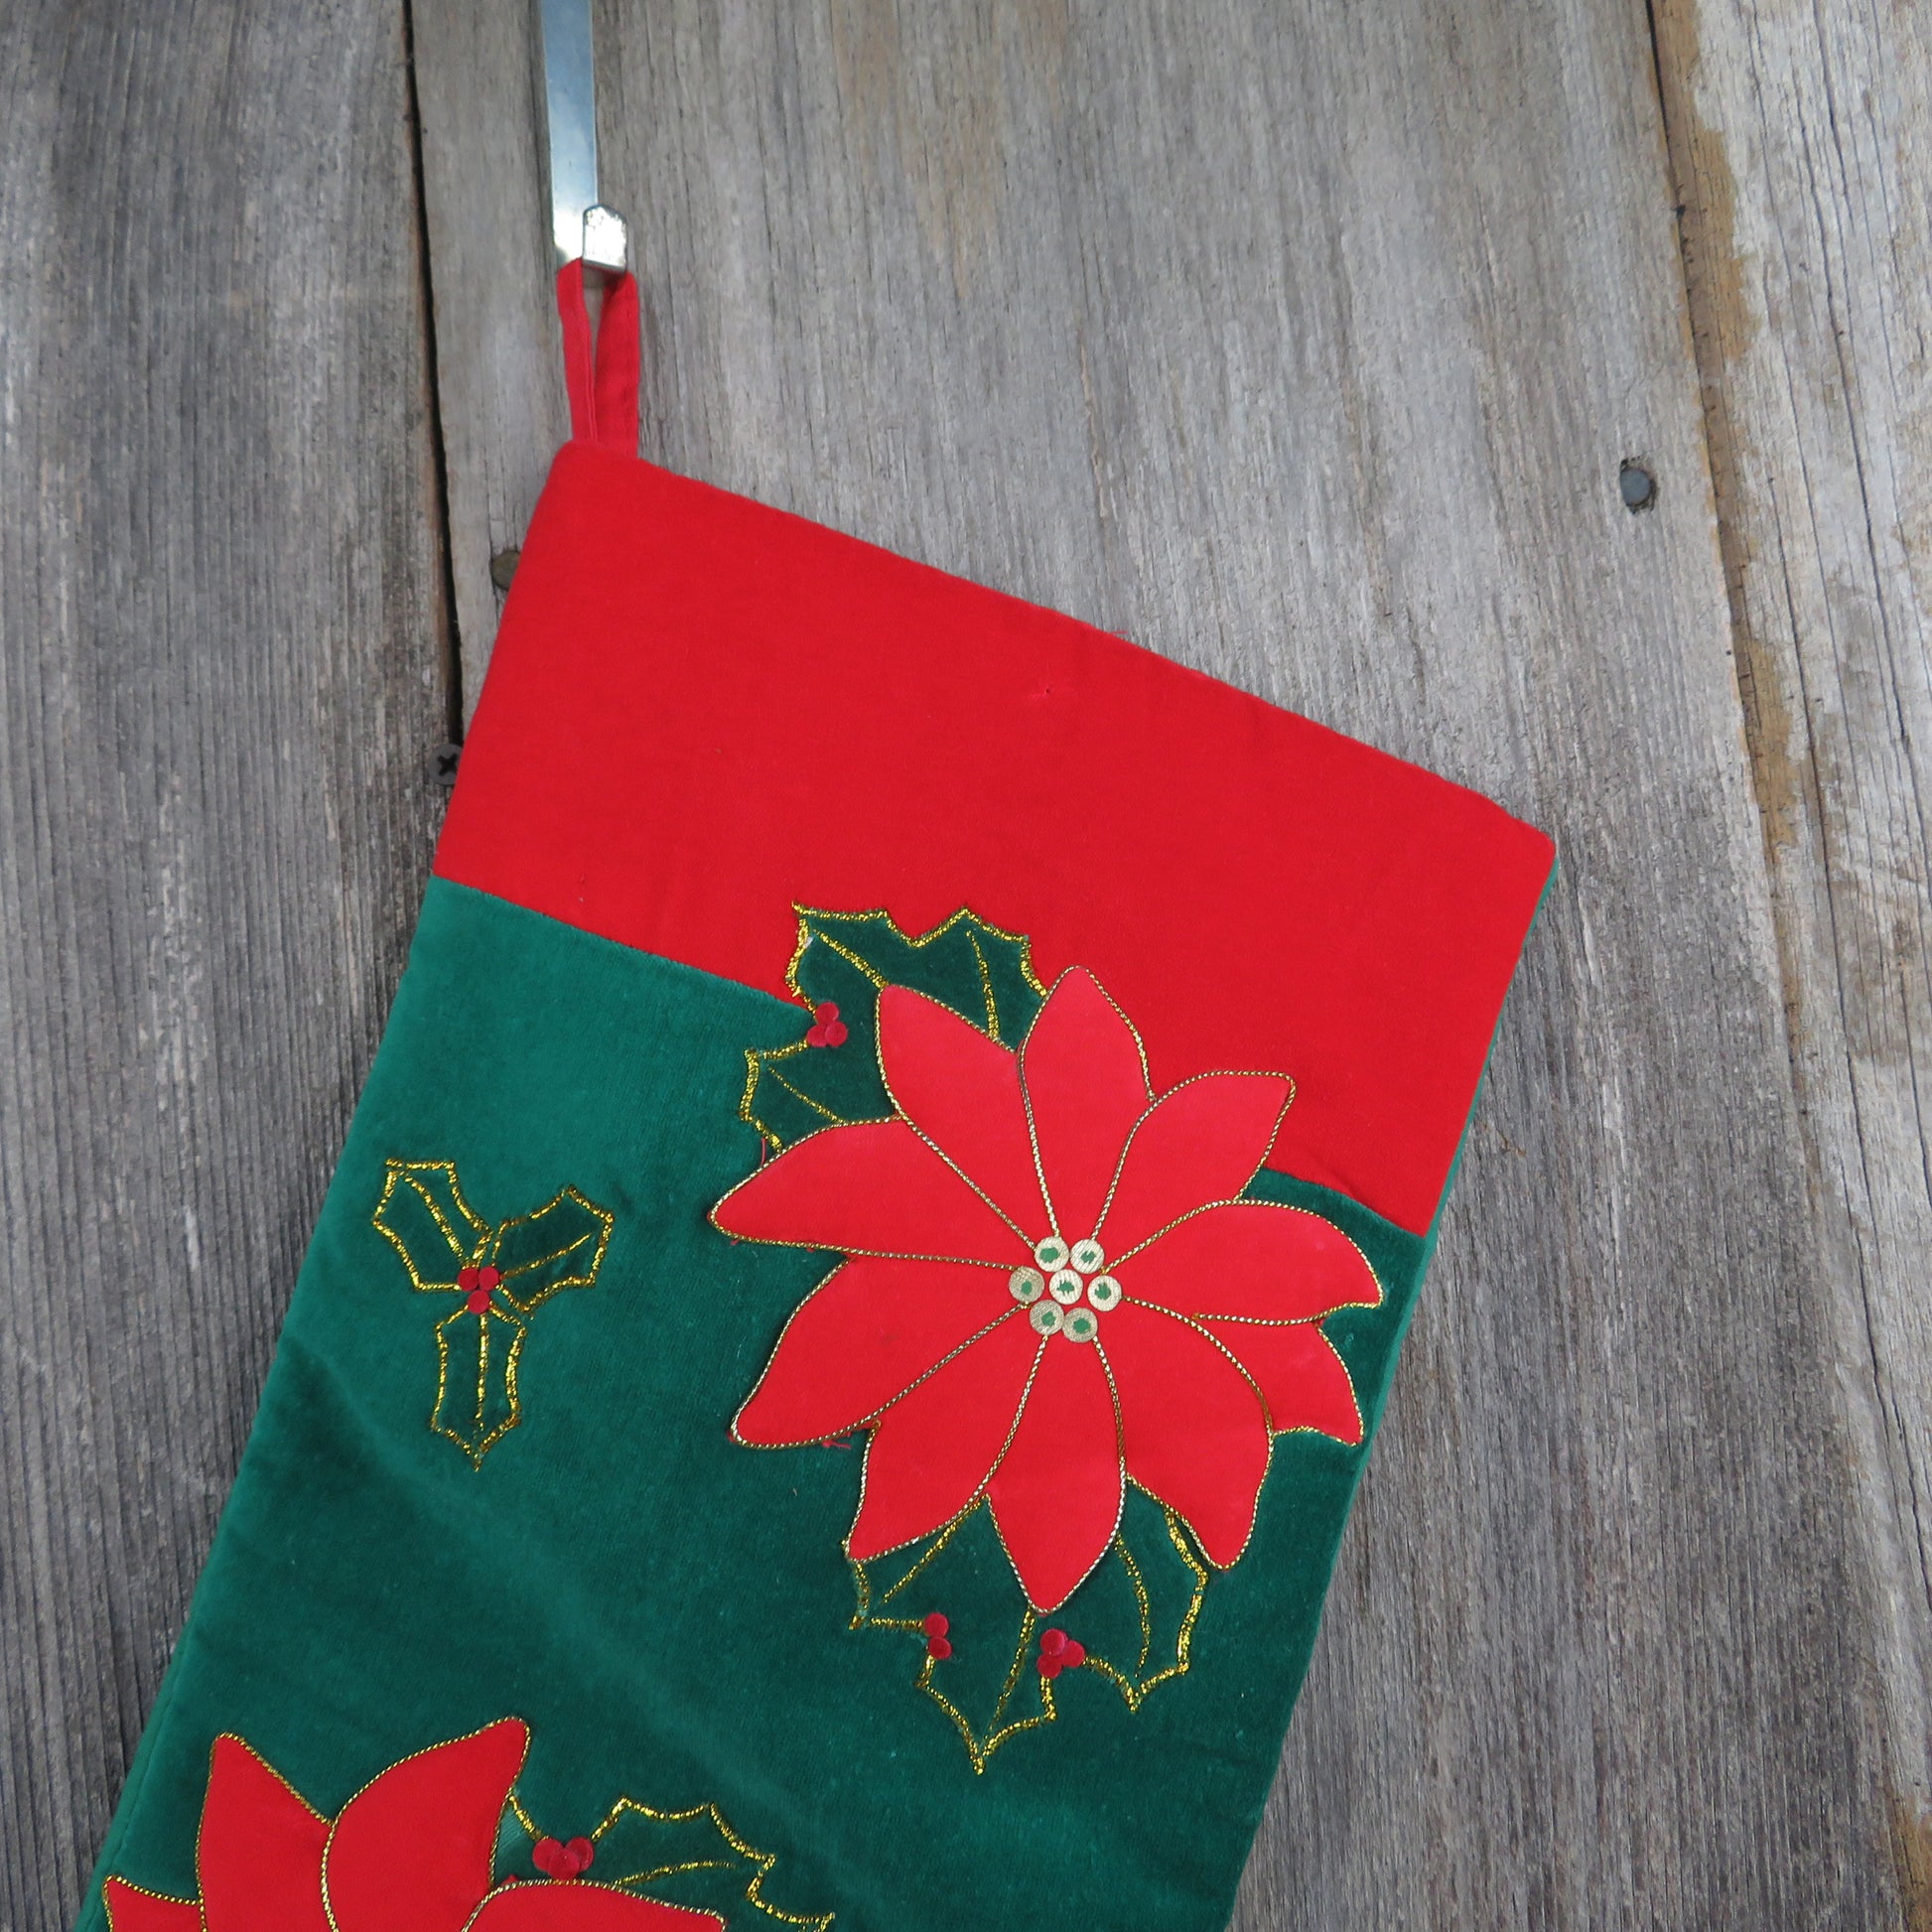 Vintage Poinsettia Christmas Stocking Green Velveteen Gold Cord Applique Flowers Holiday Home Decor - At Grandma's Table